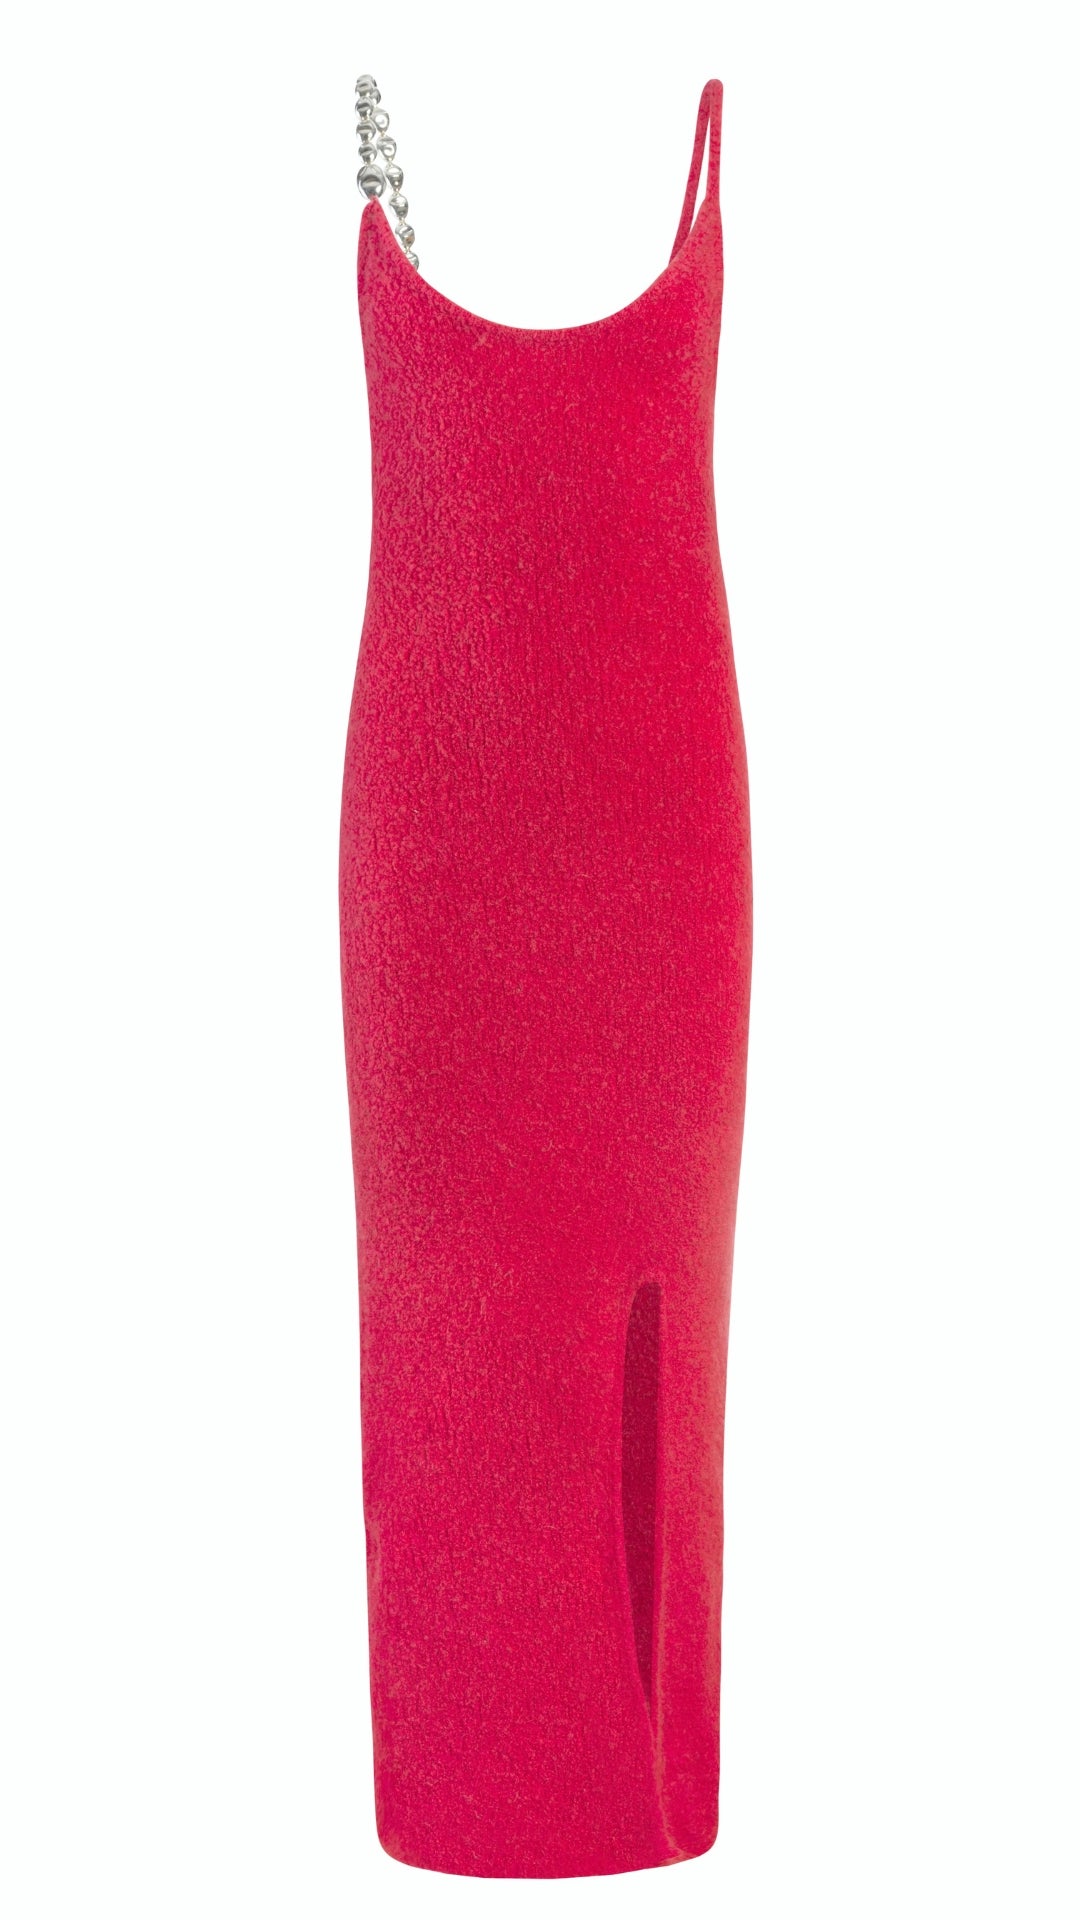 Alejandra Alonso Rojas Machine Knit Dress Pink with Silver Strap. Crafted in the softest camel wool it is a form fitting dress with one thin straps and one silver metallic strap and falls to midi length. It has a slit to just above the knee on one side. Product photo showing front view.